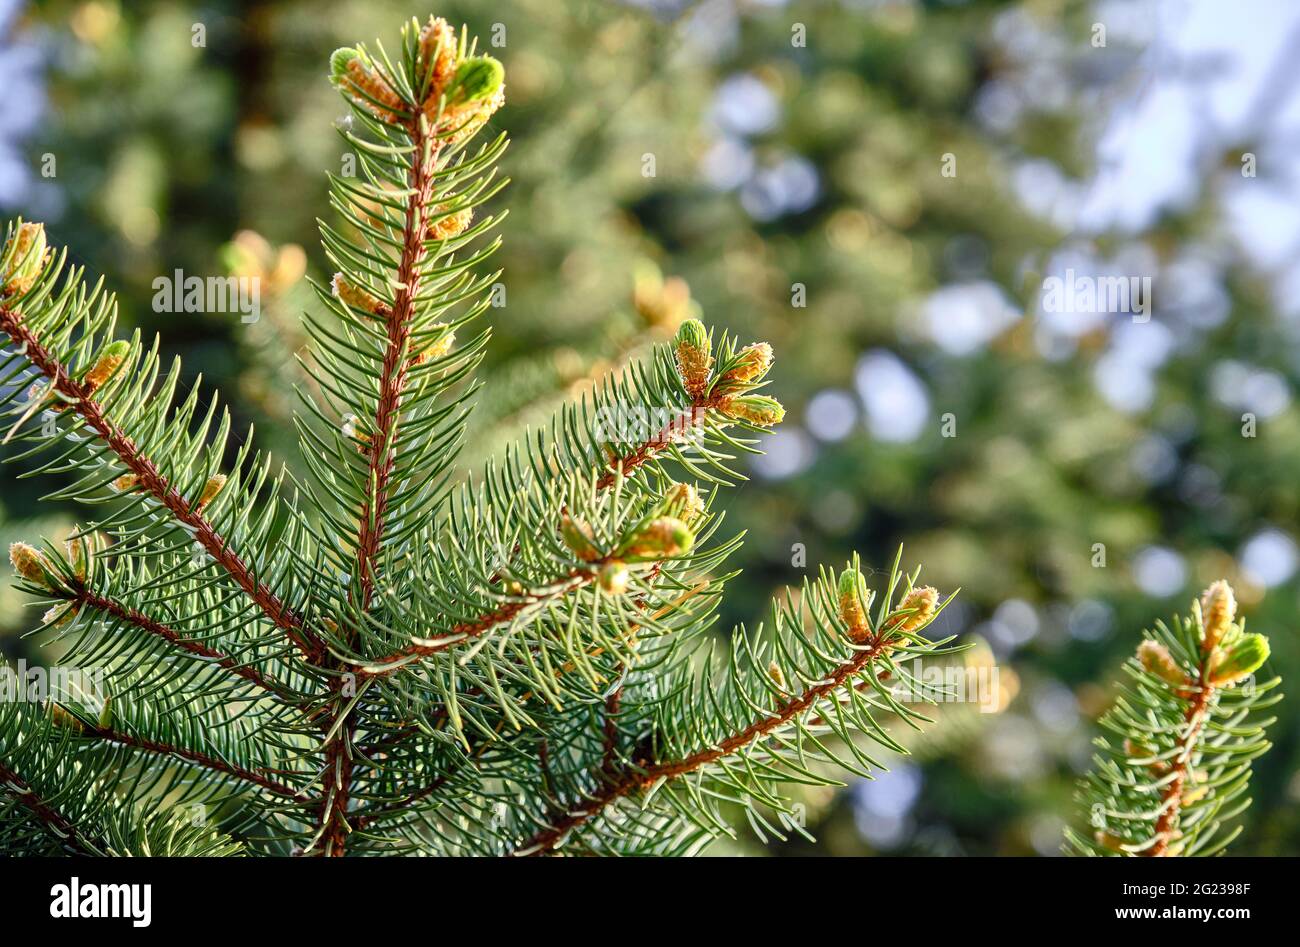 Spring fresh spruce branches; prosperity, well-being, continuation of life concept Stock Photo